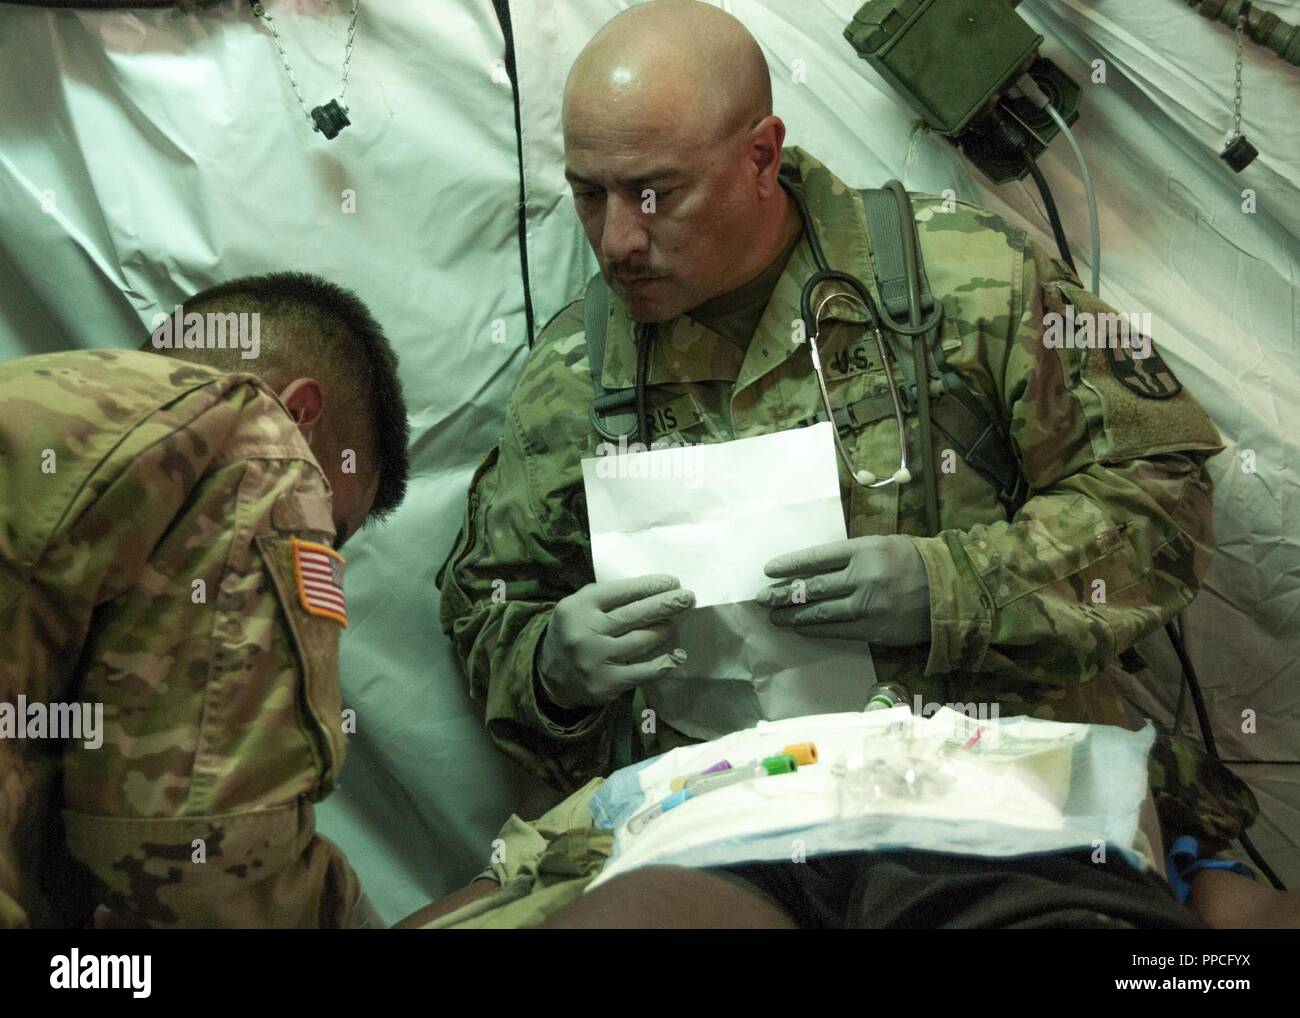 https://c8.alamy.com/comp/PPCFYX/sgt-1st-class-damion-orris-respiratory-therapist-with-the-131st-field-hospital-528th-hospital-center-assesses-a-mock-patient-during-a-simulated-emergency-as-part-of-a-week-long-exercise-at-fort-bliss-aug-15-the-exercise-was-designed-to-test-capabilities-build-rapport-and-increase-efficiency-at-the-armys-second-ever-updated-modular-design-field-hospital-PPCFYX.jpg